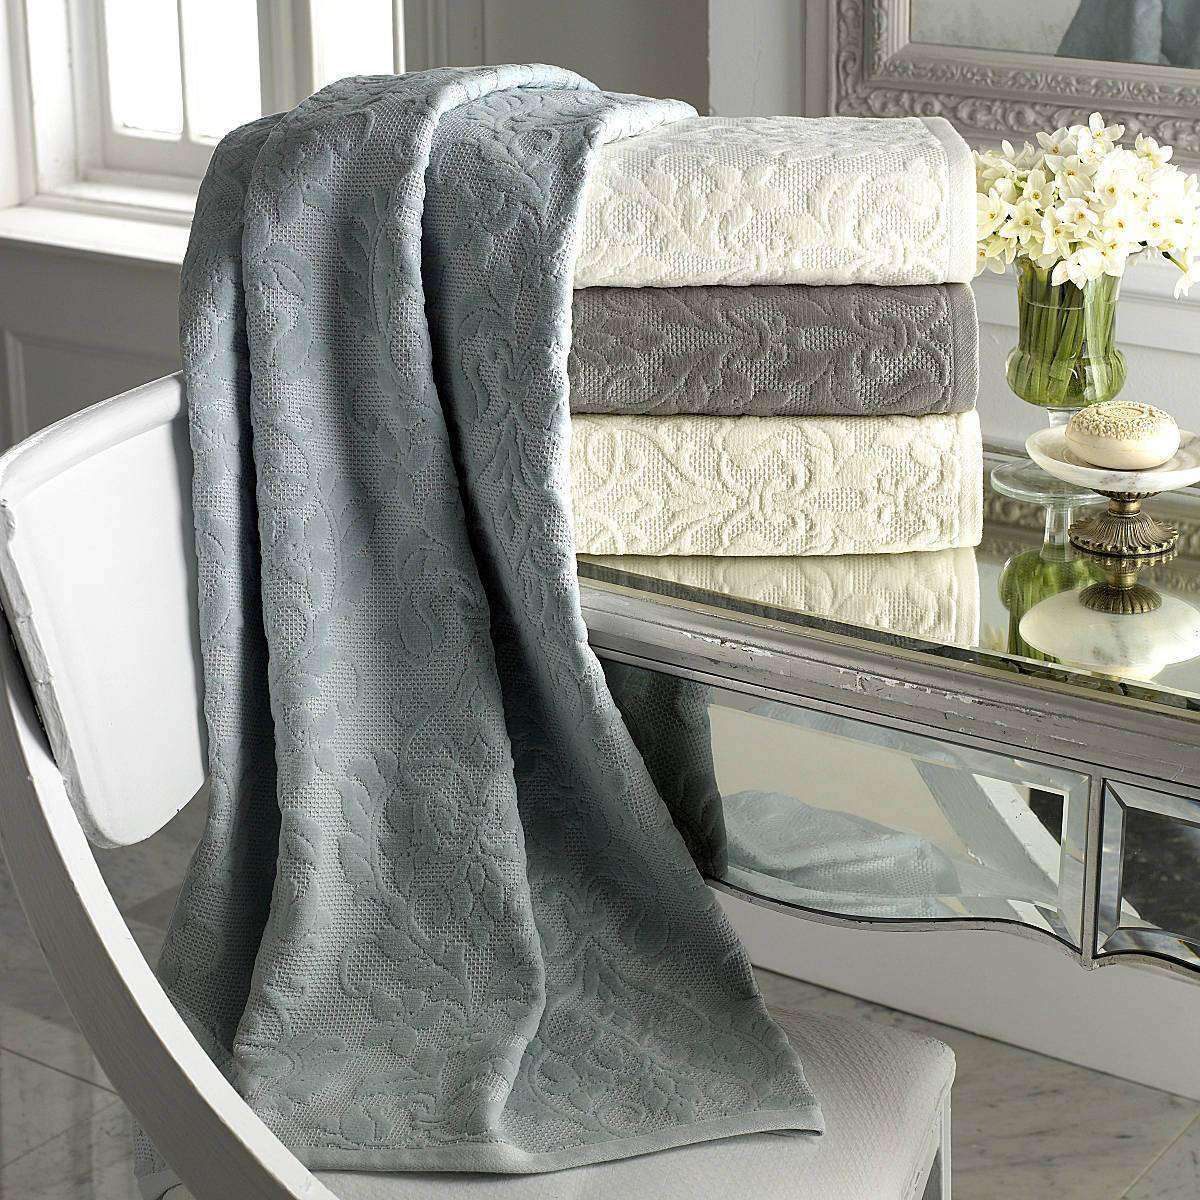 Luxury 100% Combed Egyptian Cotton Super Soft Towels Hand Bath